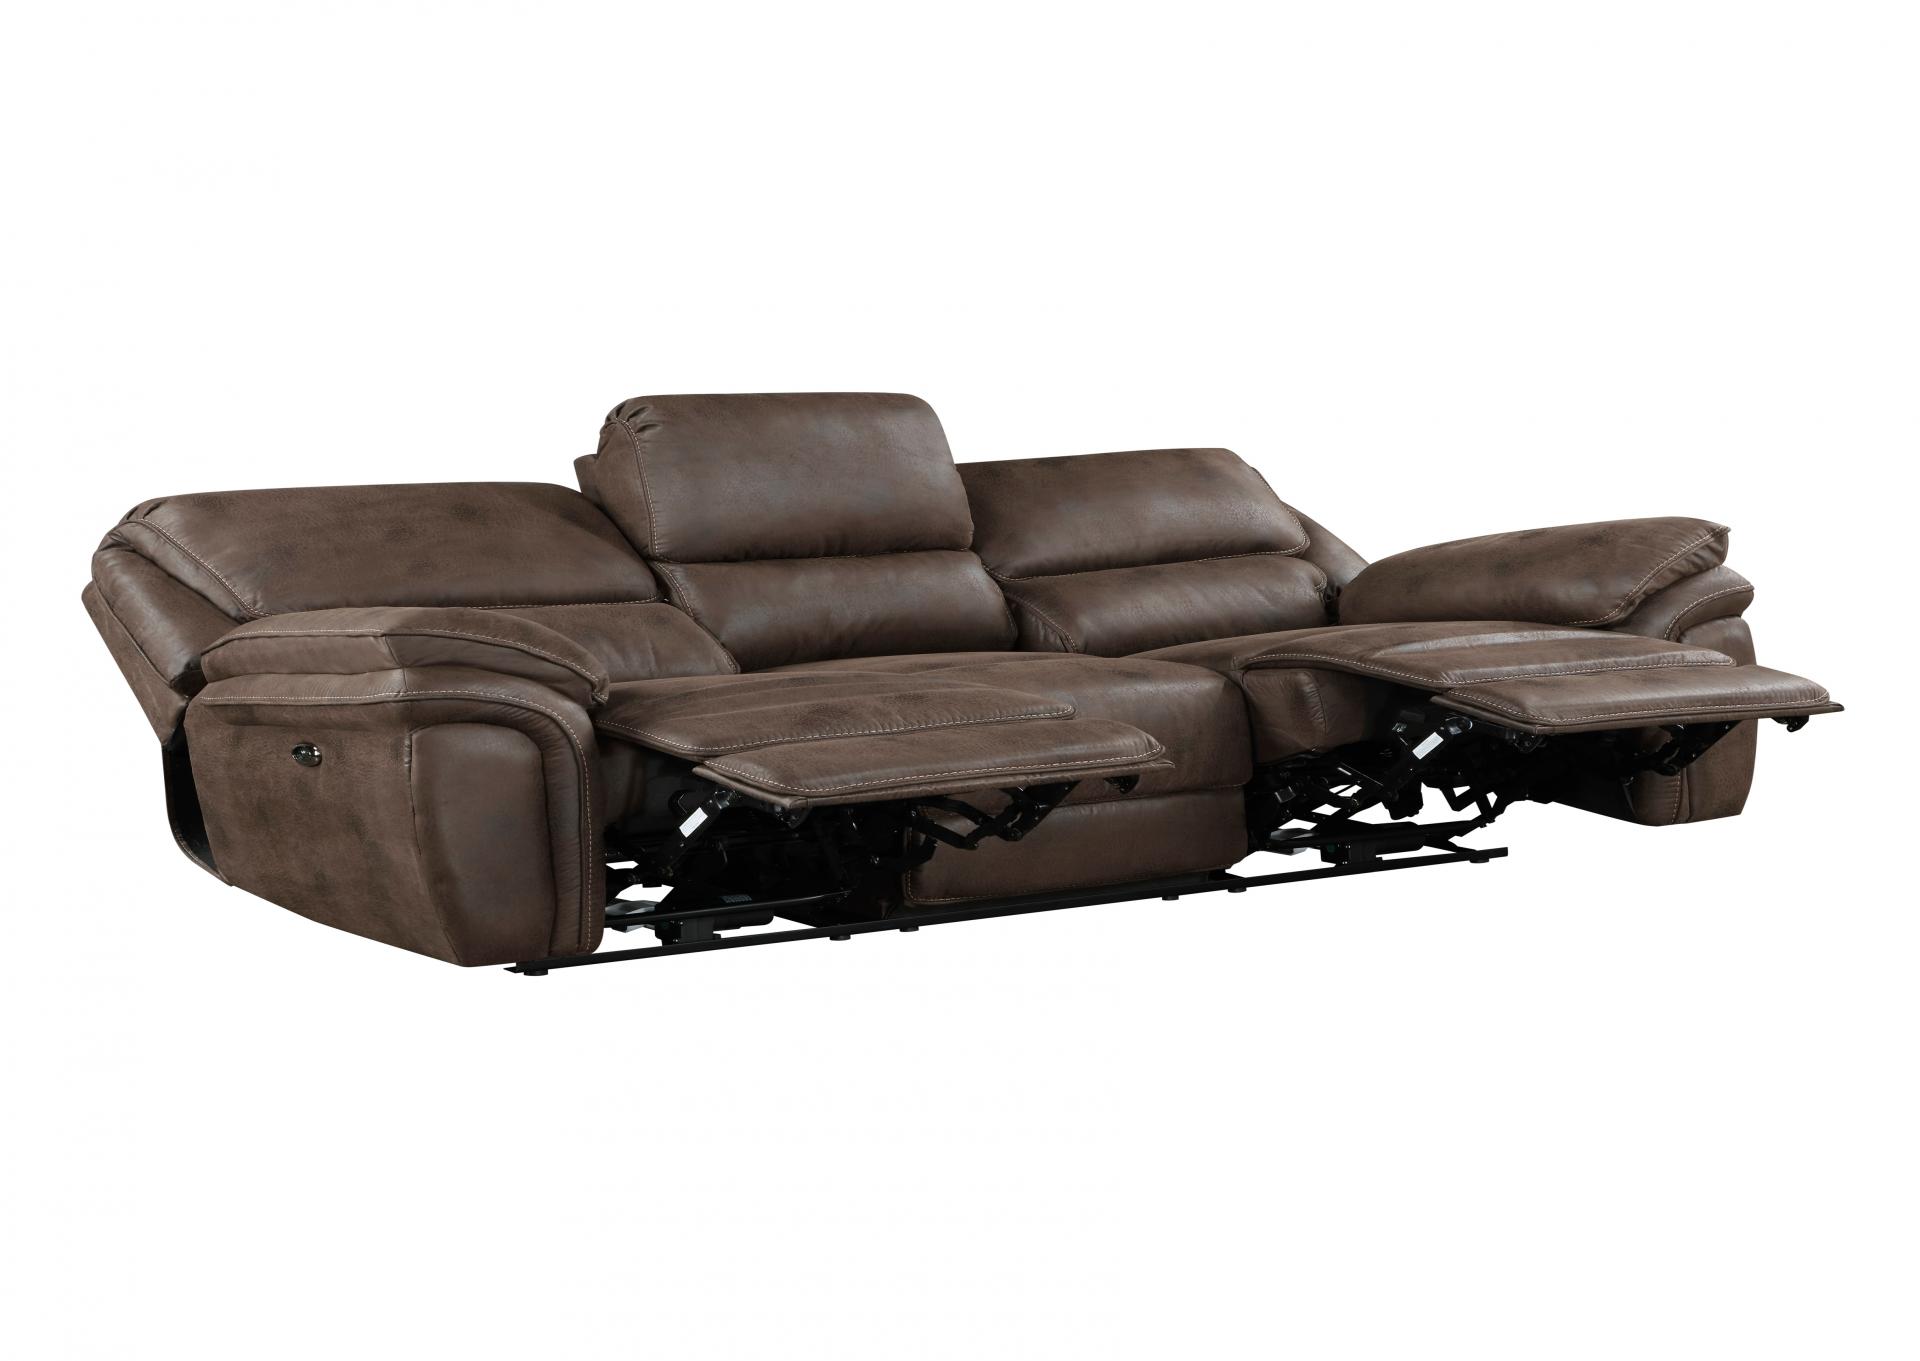 Proctor Power Double Reclining Sofa in Brown,Homelegance